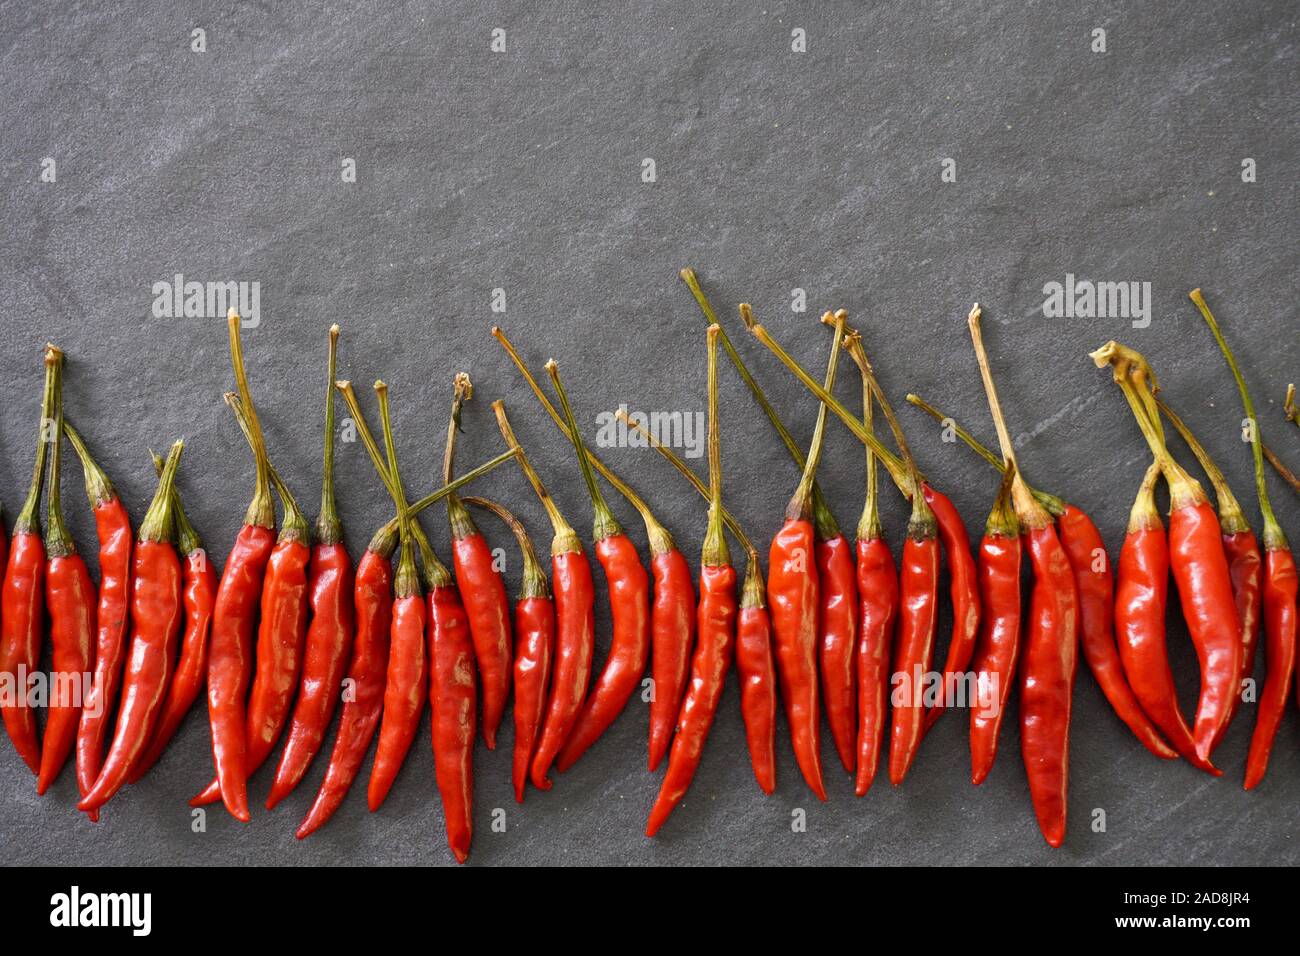 A row of bright red Thai chiles with green stems on a gray slate background; view from above; food, design, background Stock Photo